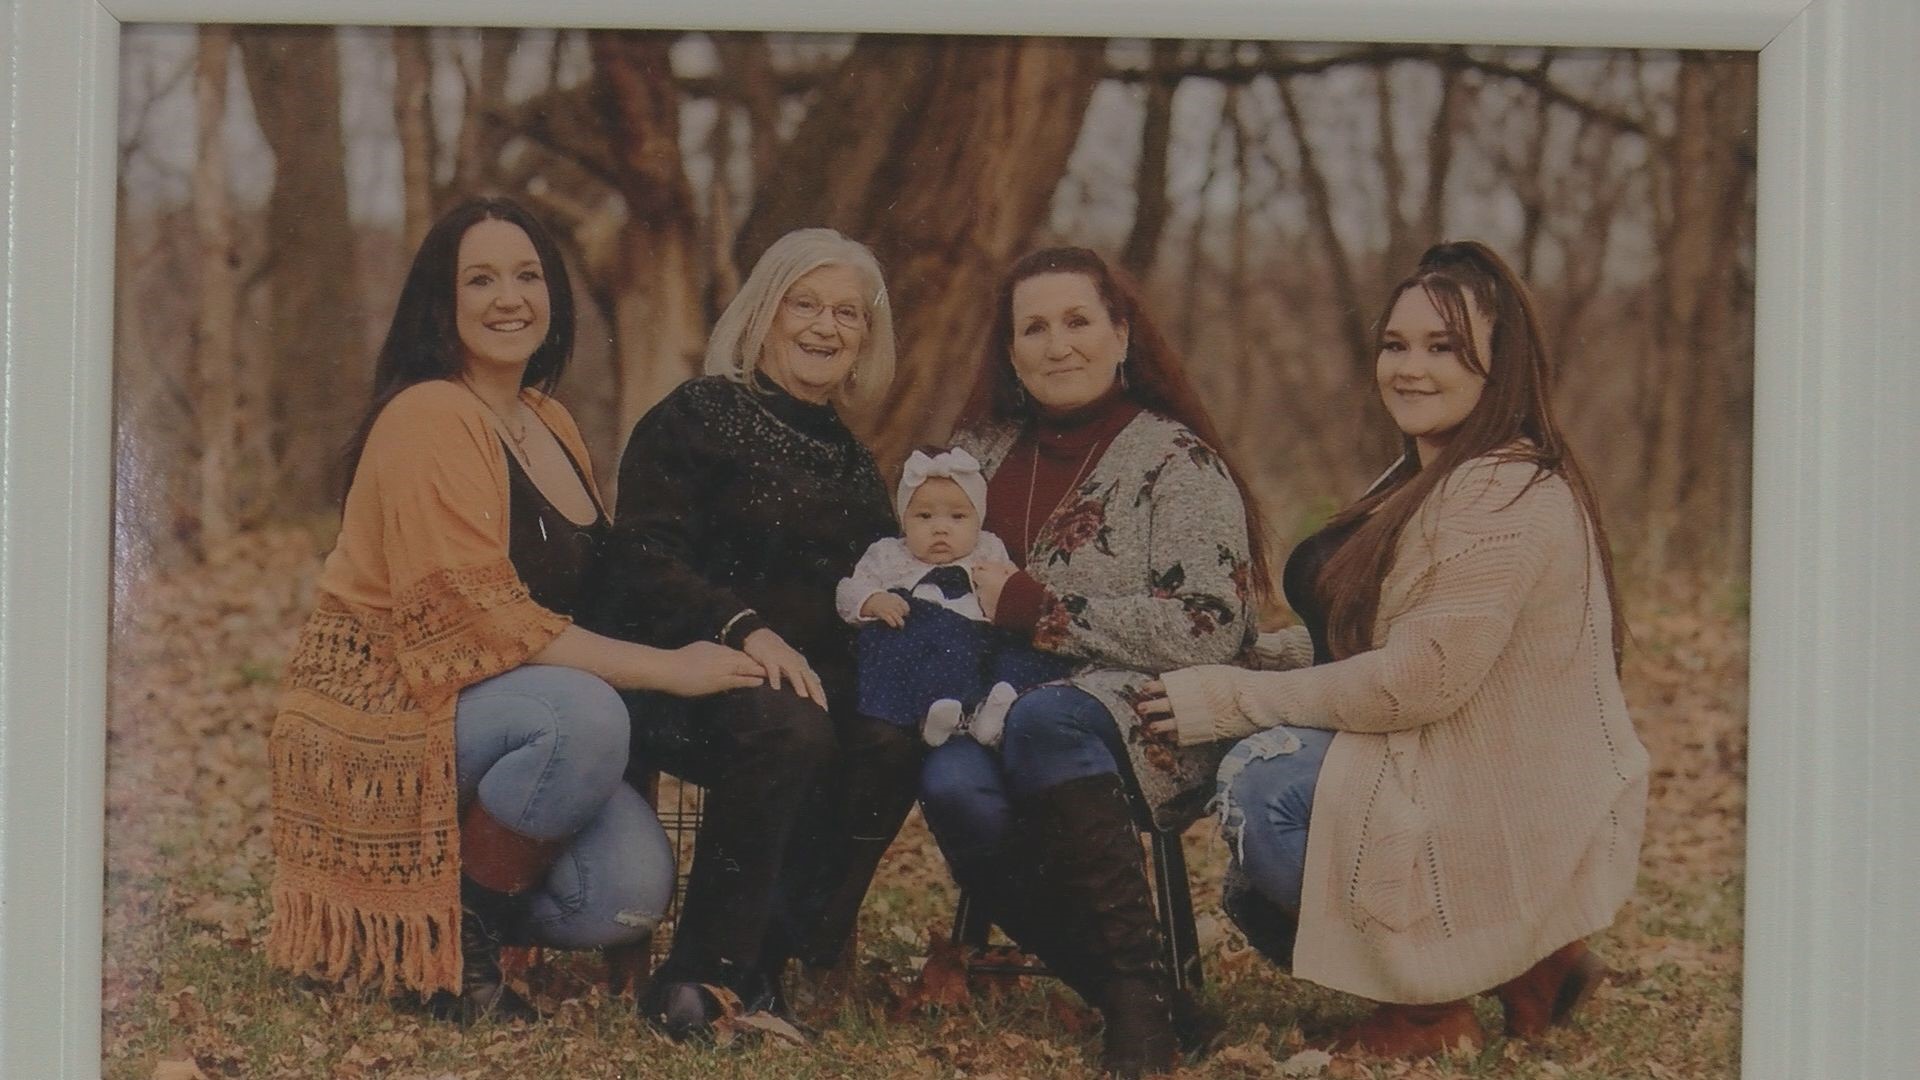 Four generations in one family able to enjoy each other's company is rare, but one family in Sylvania has five generations of strong women.